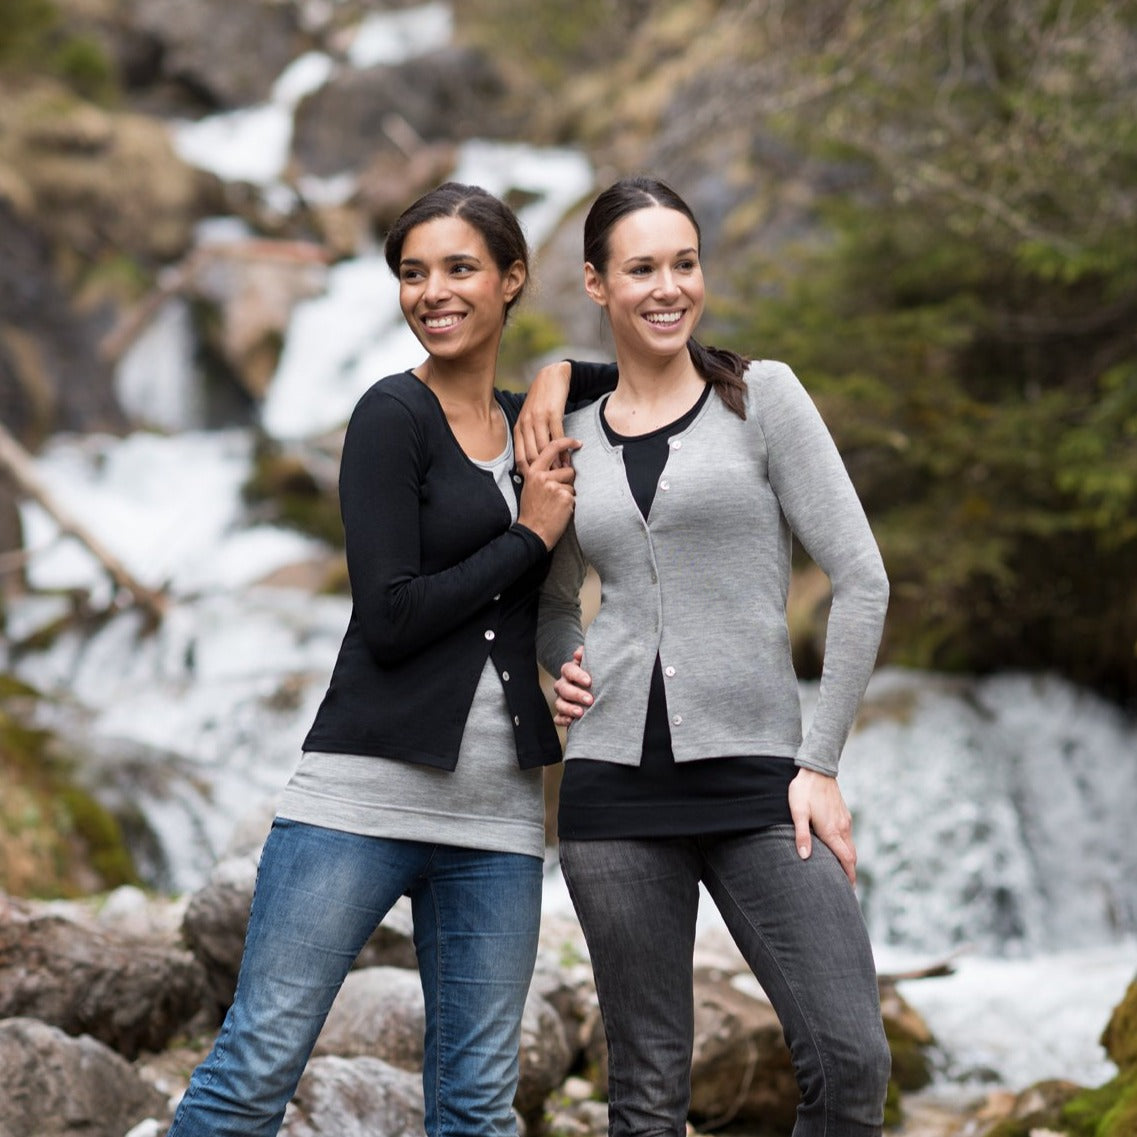 TOPS FOR WOMEN – Warmth and Weather